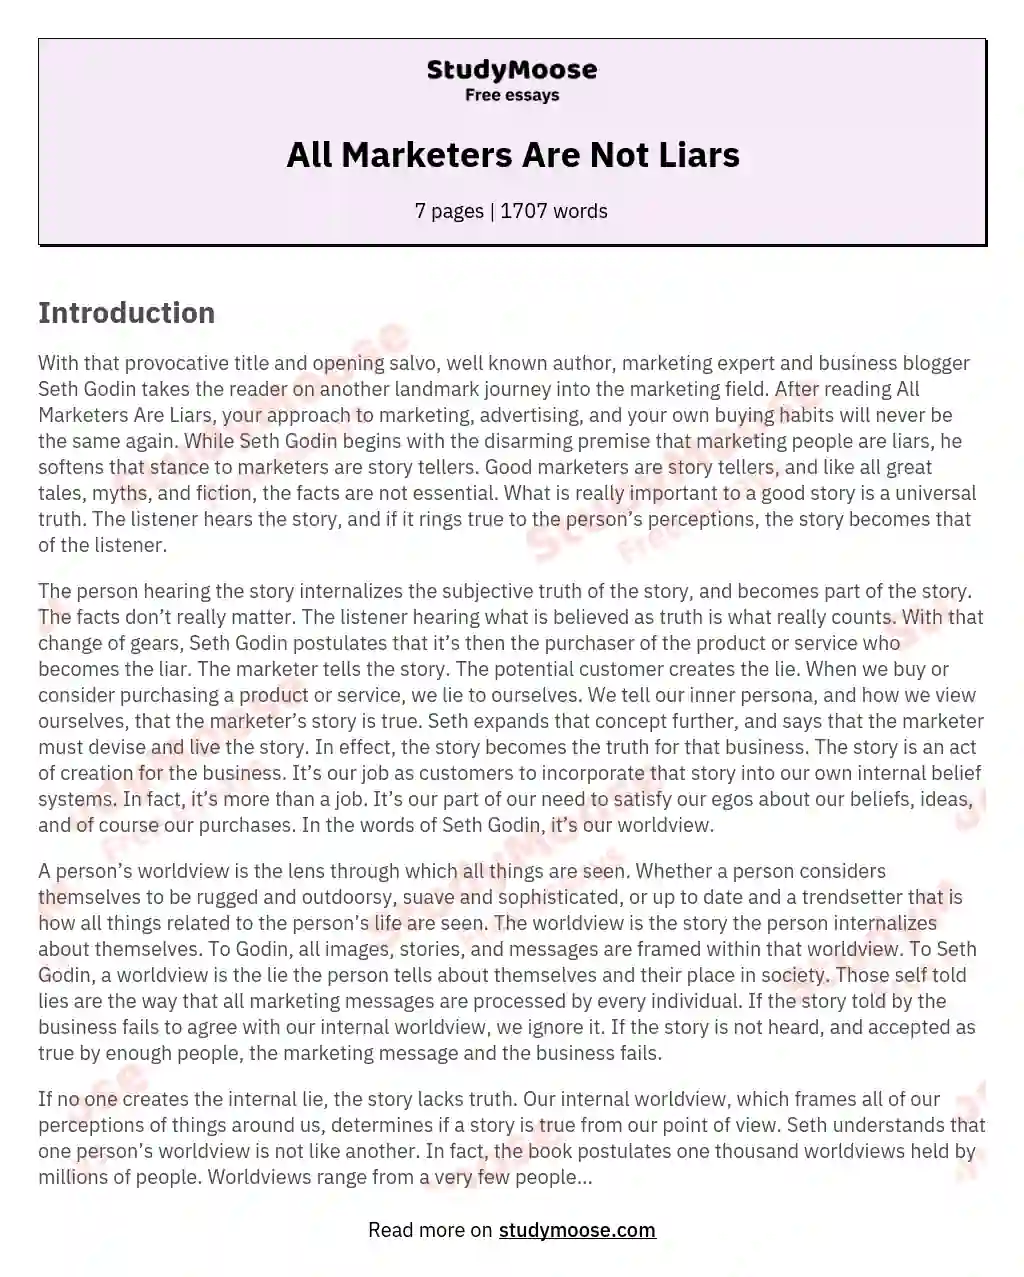 All Marketers Are Not Liars